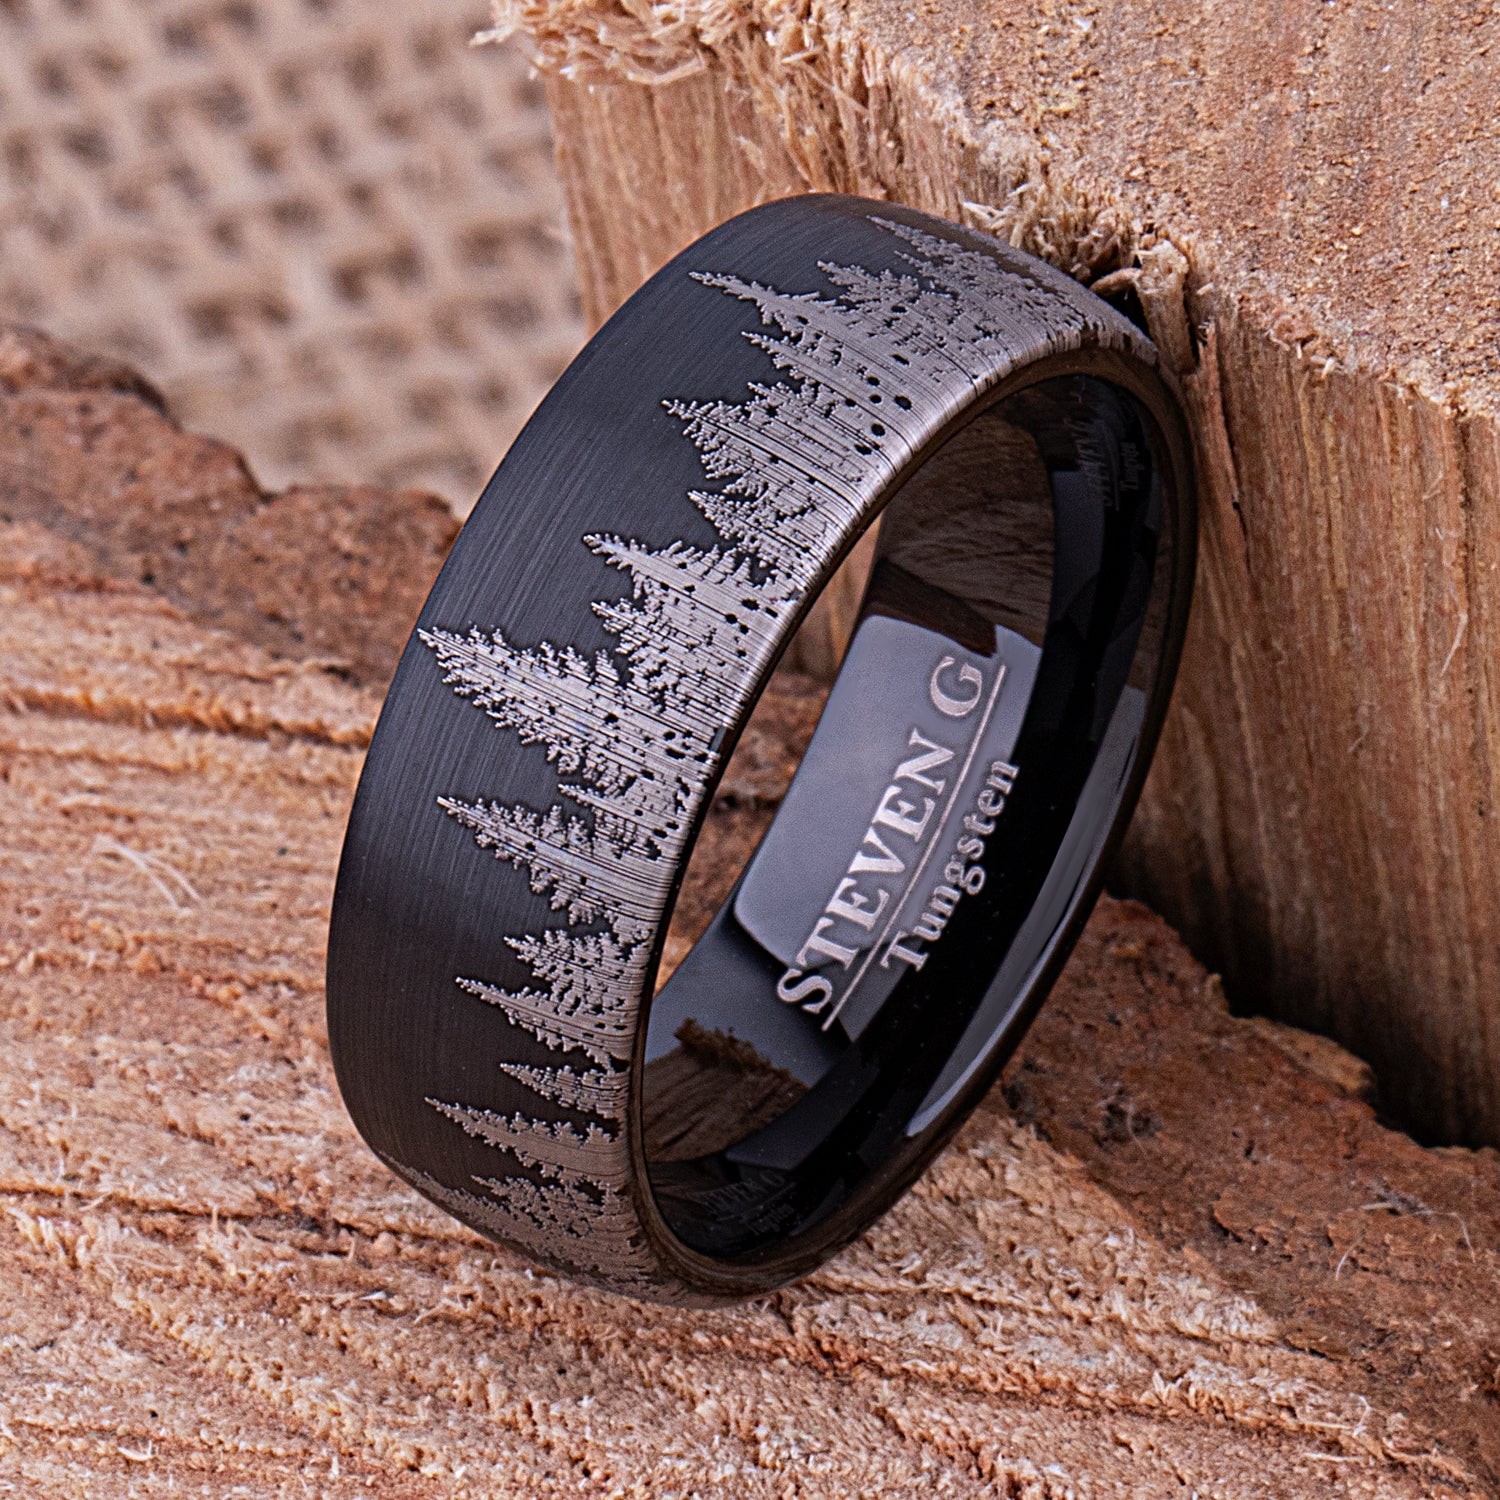 Tungsten Wedding Bands Set, Tungsten Wedding Ring, Promise Wedding Bands,  His and Her Promise Rings, Couple Ring, His and Hers Match Set , Band To  Hold Rings Together 